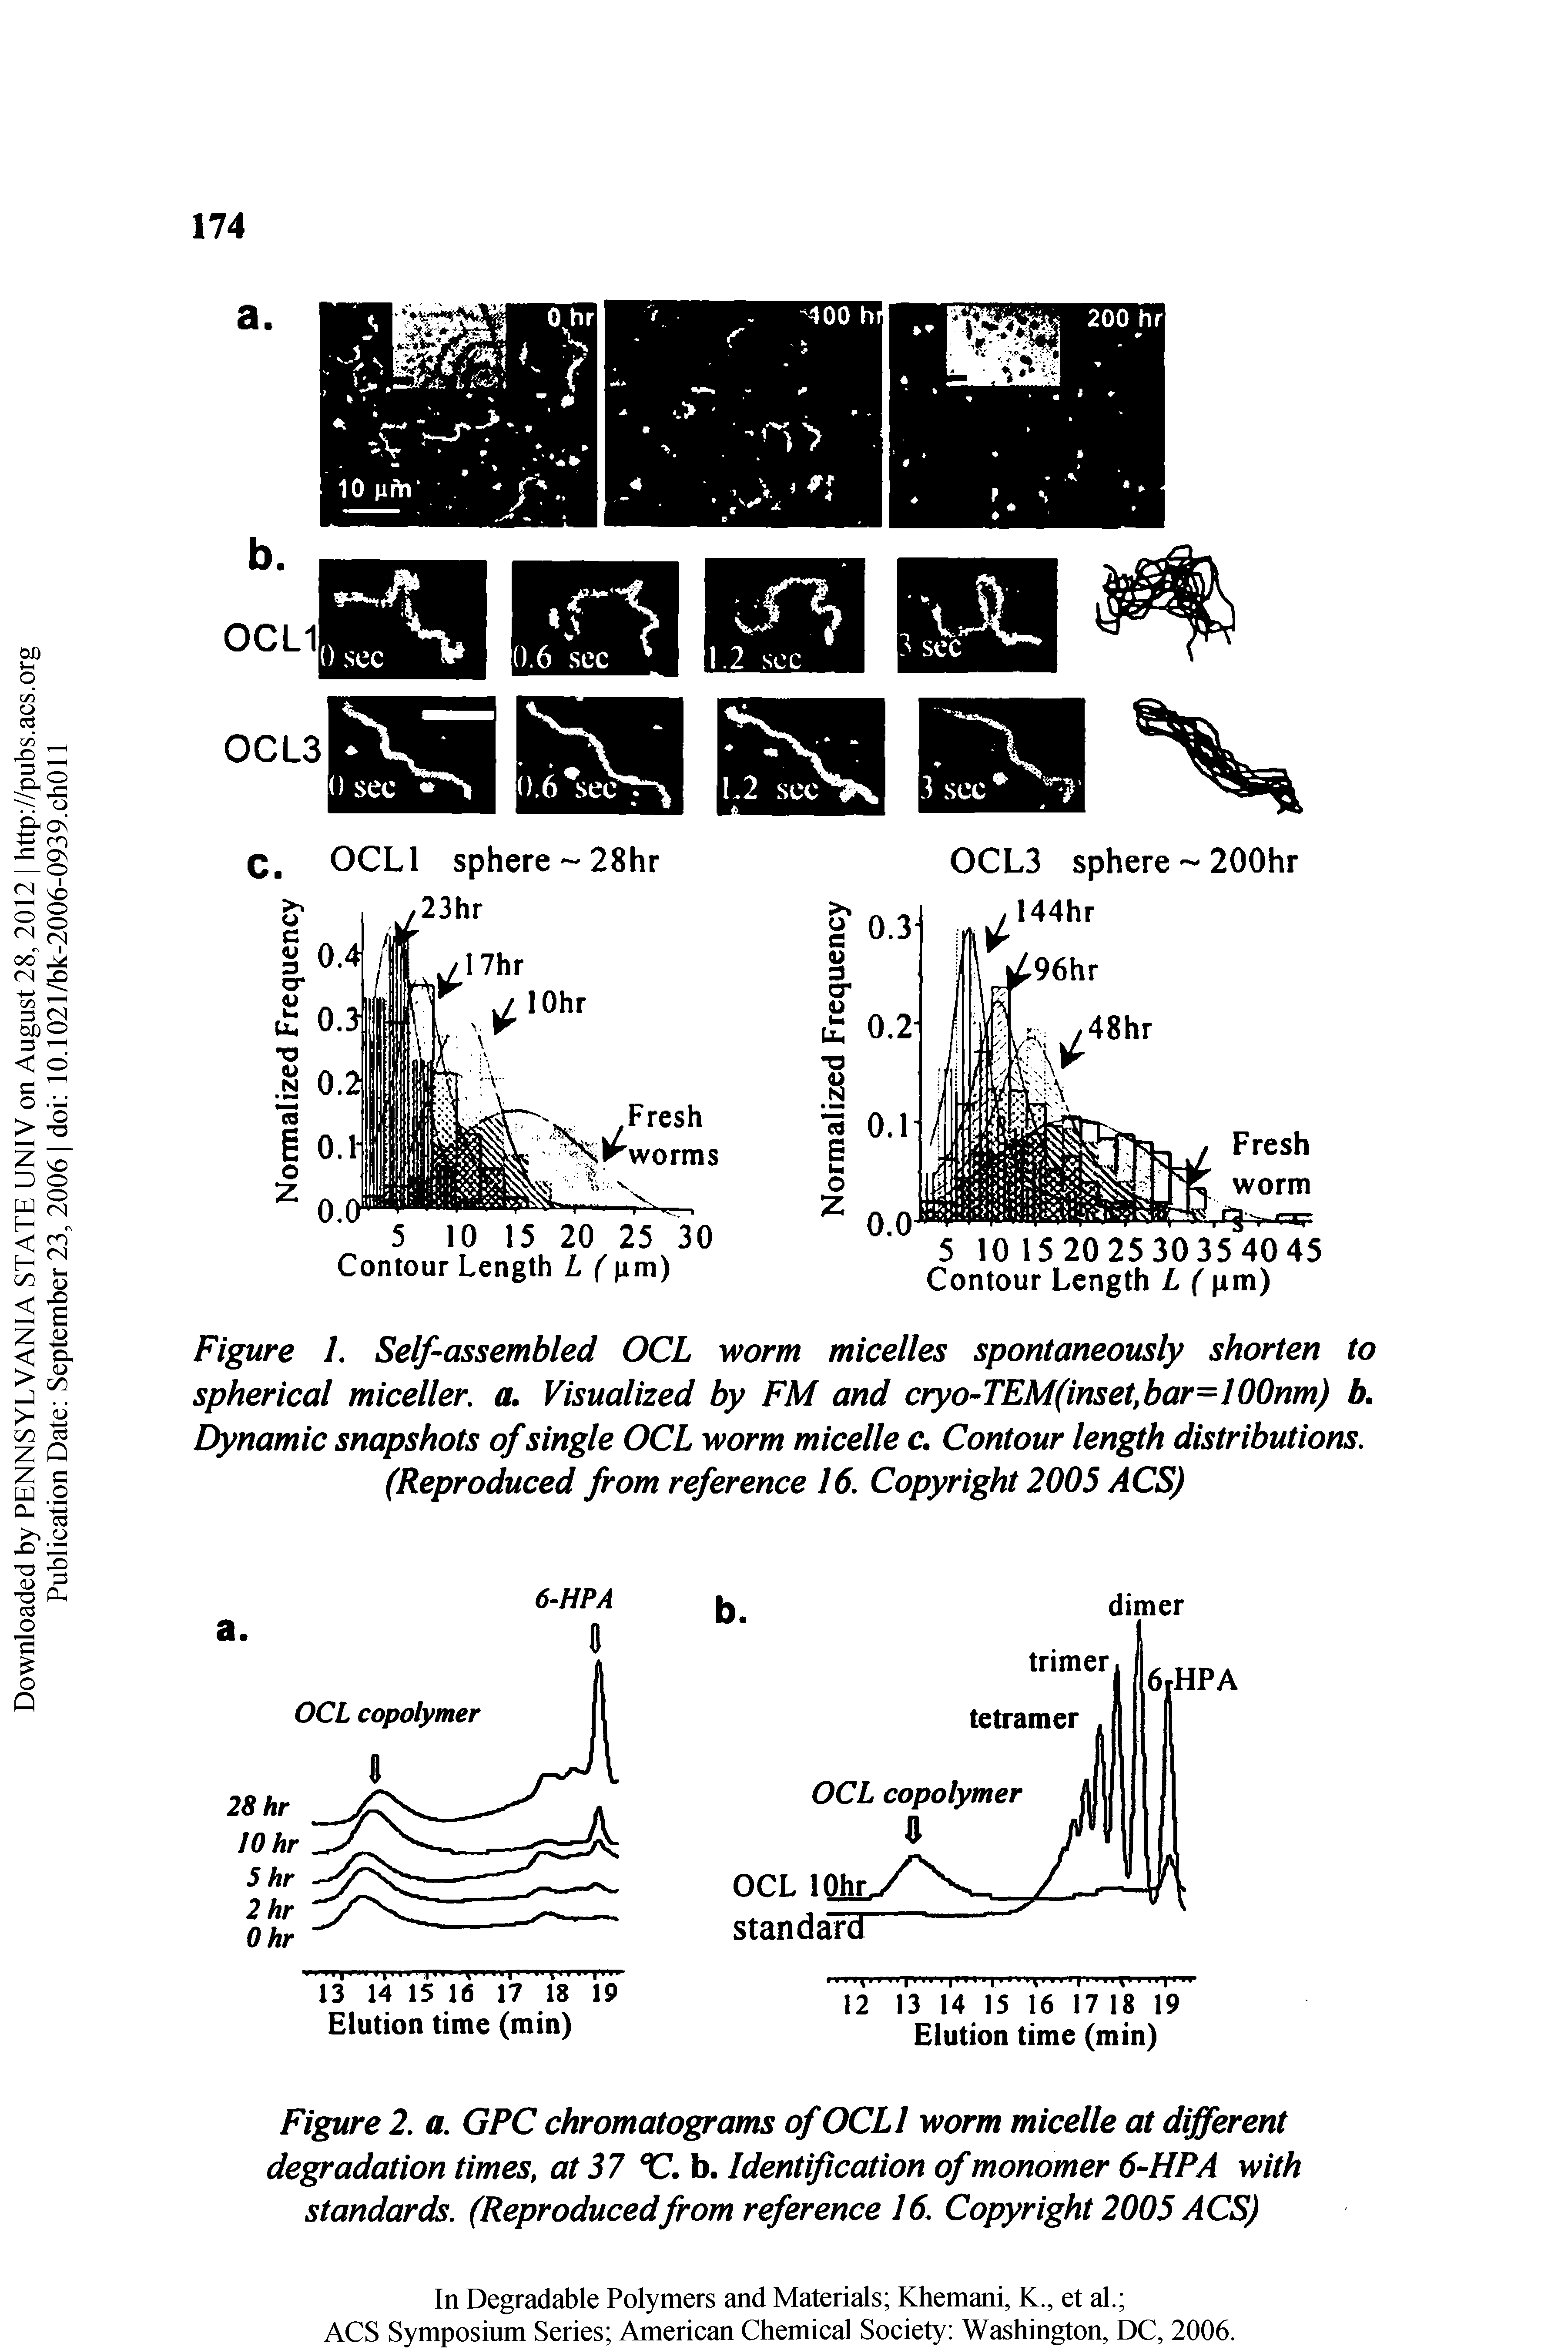 Figure L Self-assembled OCL worm micelles spontaneously shorten to spherical miceller. a. Visualized by FM and cryo-TEM(inset,bar=100nm) b. Dynamic snapshots of single OCL worm micelle c. Contour length distributions. (Reproduced from reference 16. Copyright 2005 ACS)...